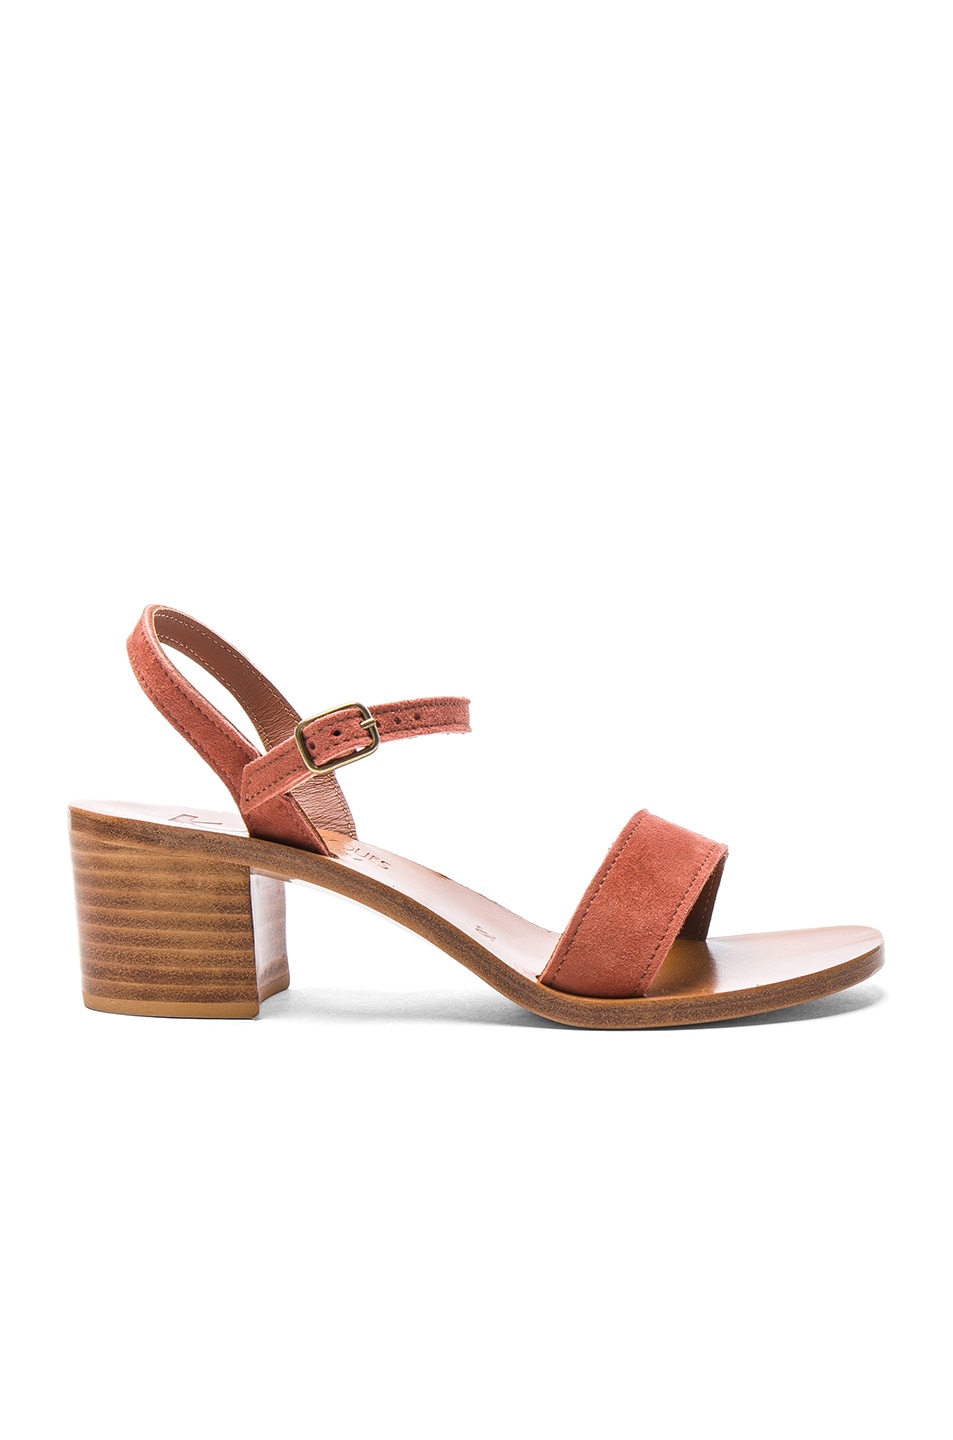 Image 1 of K Jacques Suede Alegria Sandals in Vel Glly